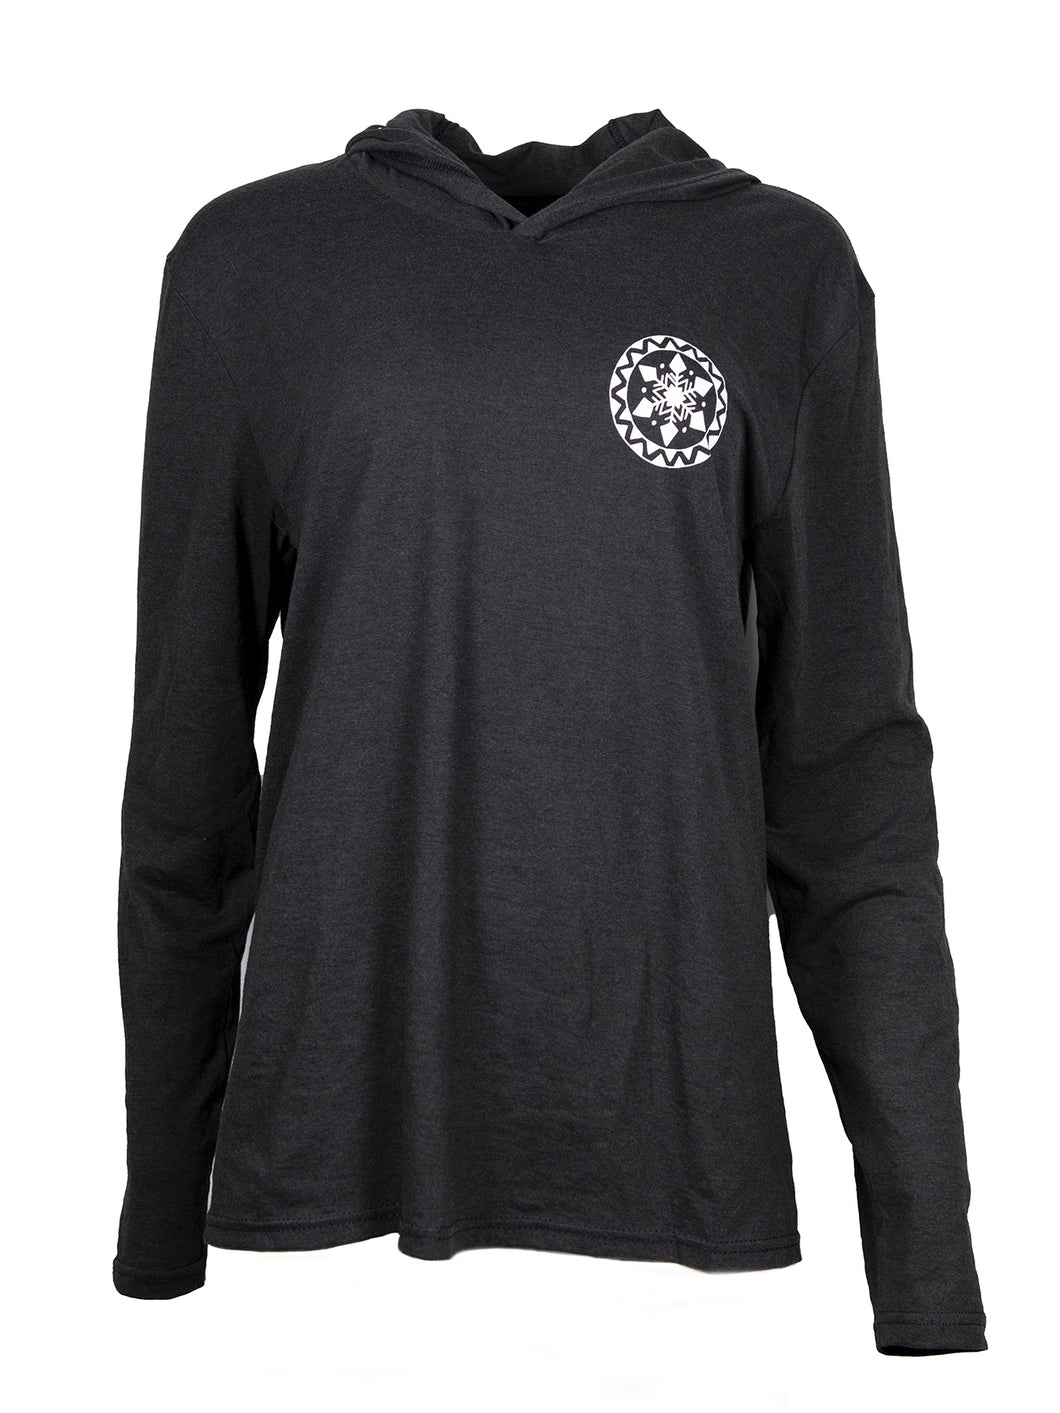 Product Image : Front View - Unisex Hooded T-shirt dark gray with small white snowflake mandala over left chest